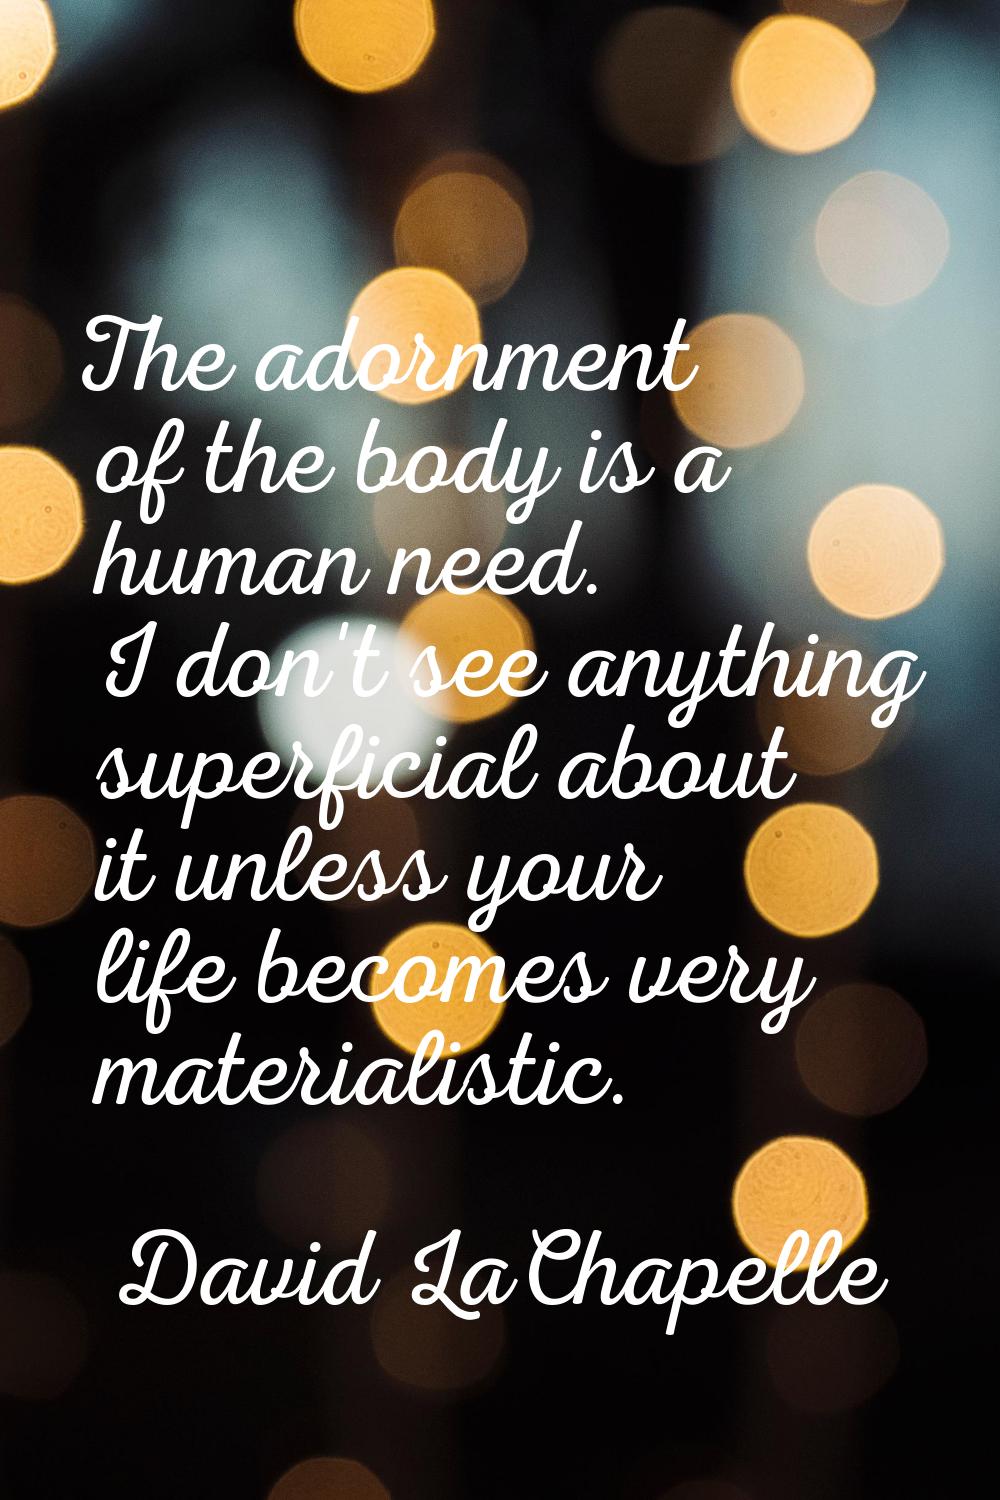 The adornment of the body is a human need. I don't see anything superficial about it unless your li